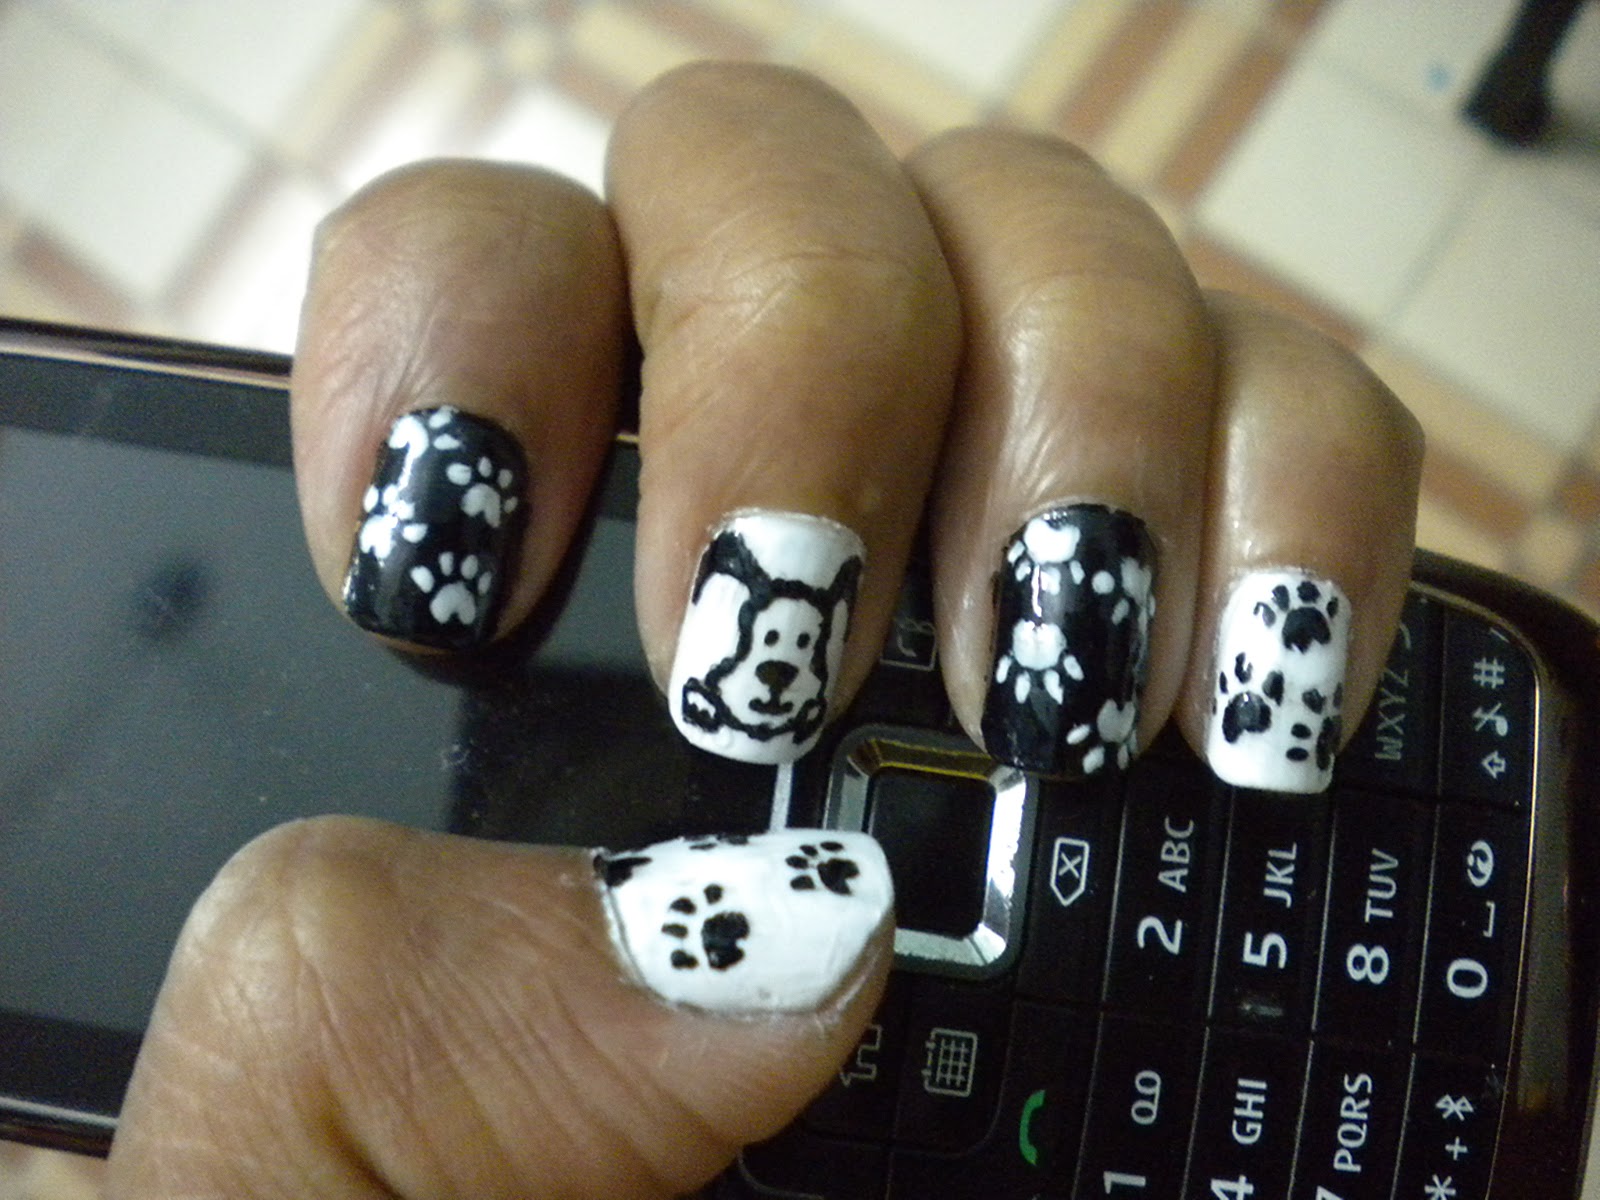 1. Cute Paw Print Acrylic Nails - wide 1